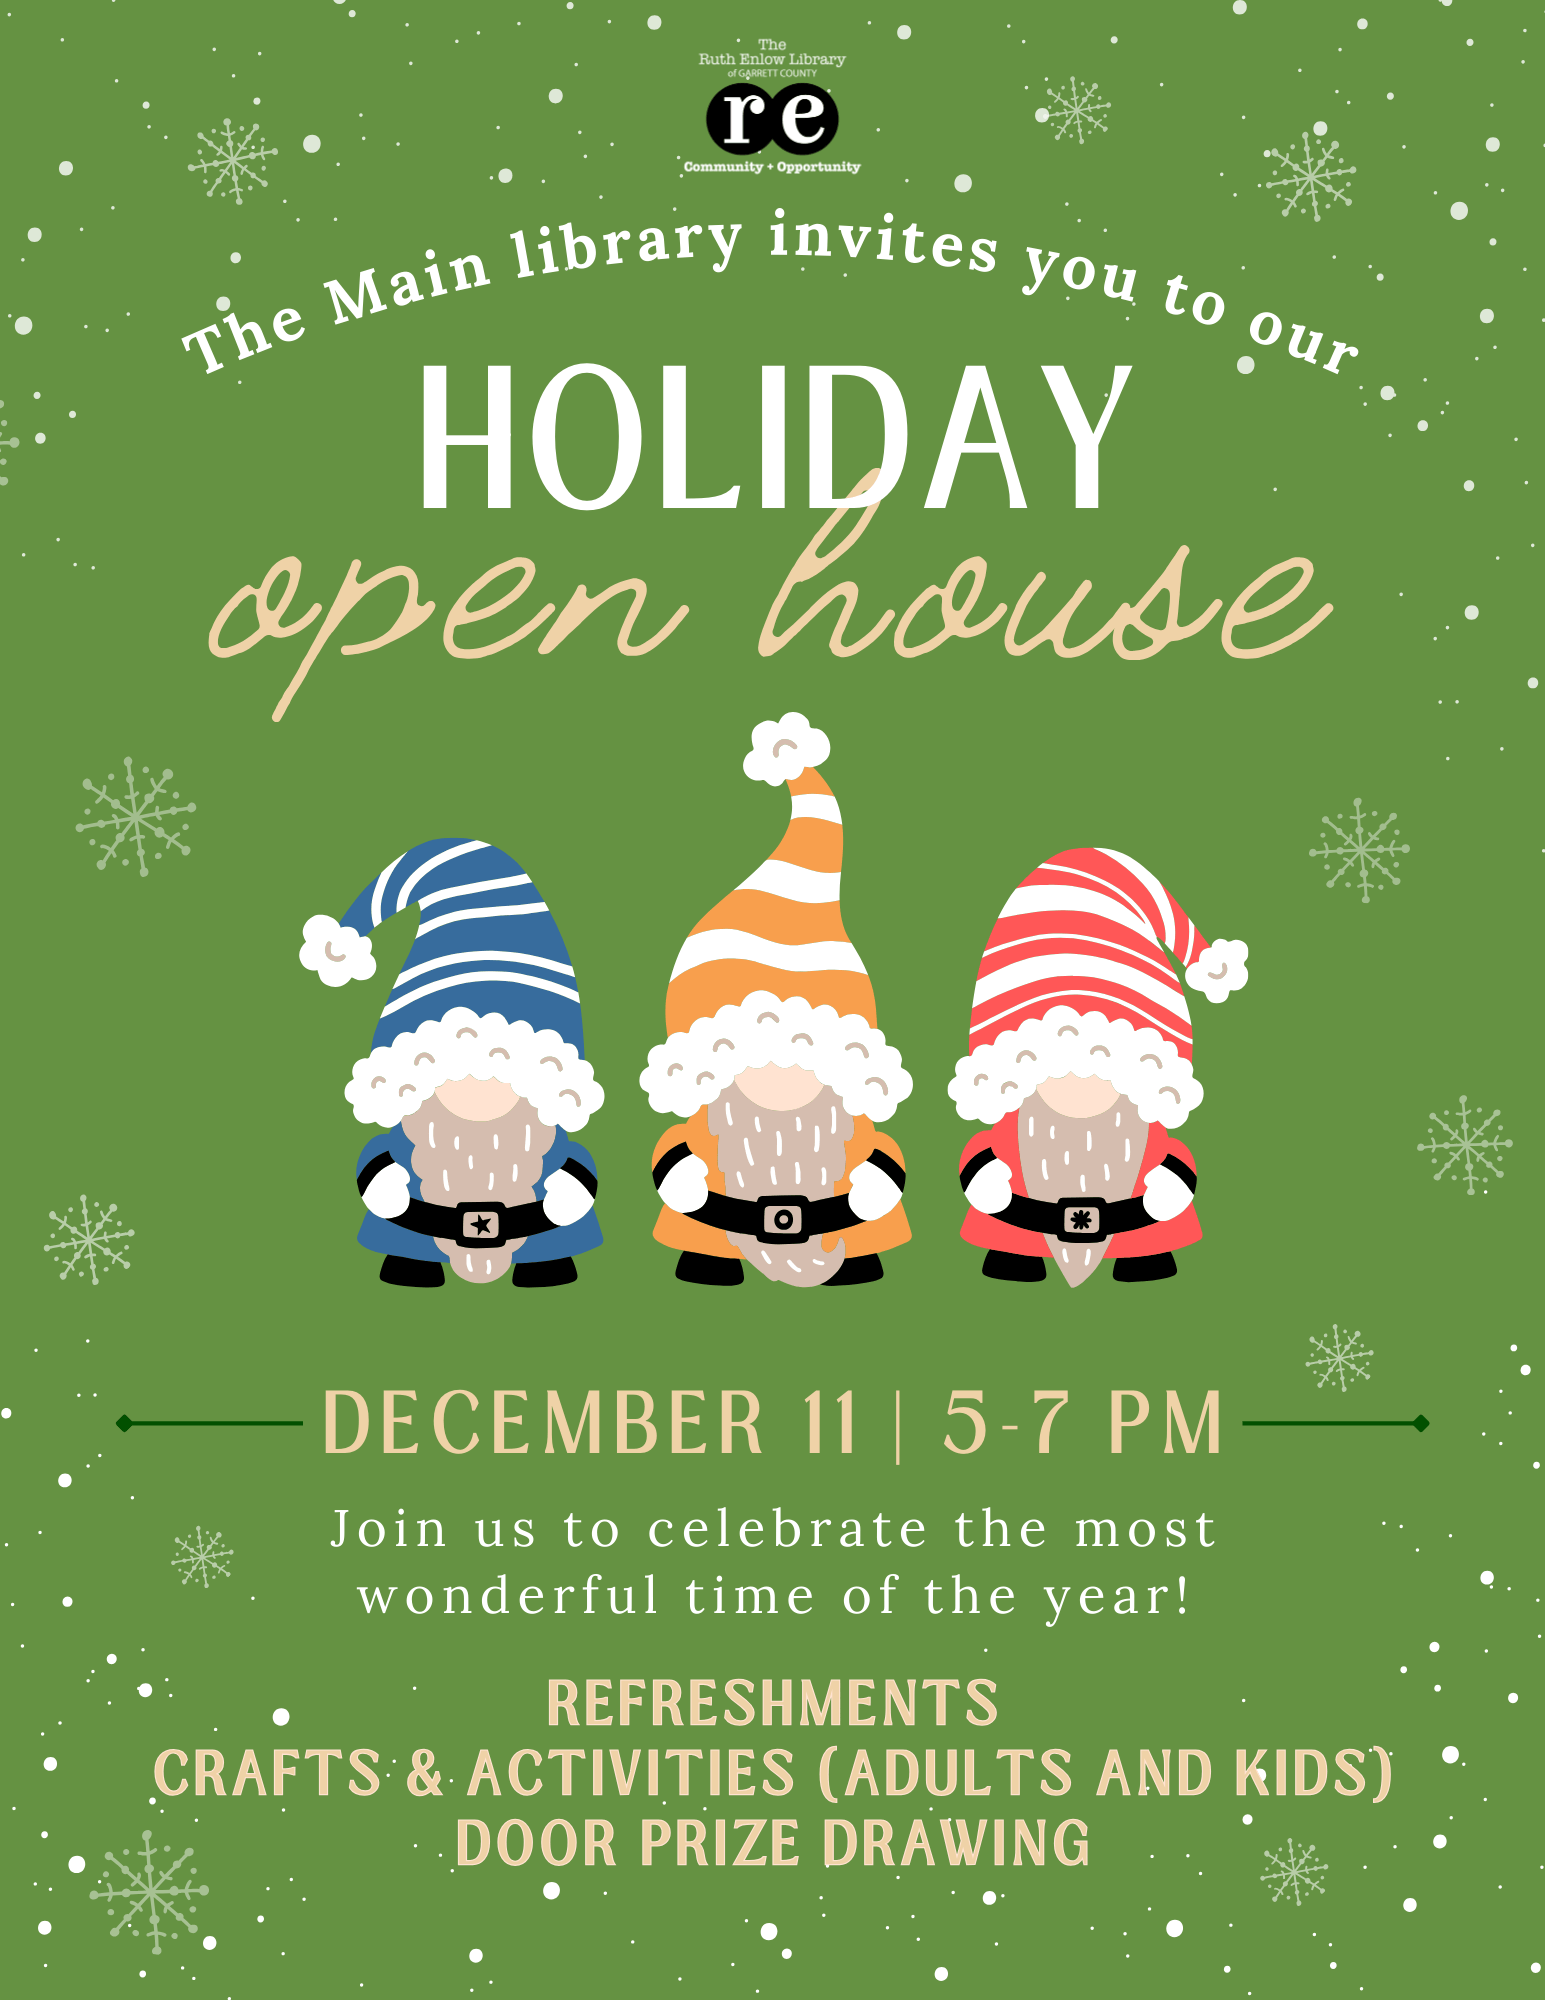 Oakland Library's Holiday Open House at Deep Creek Lake, MD